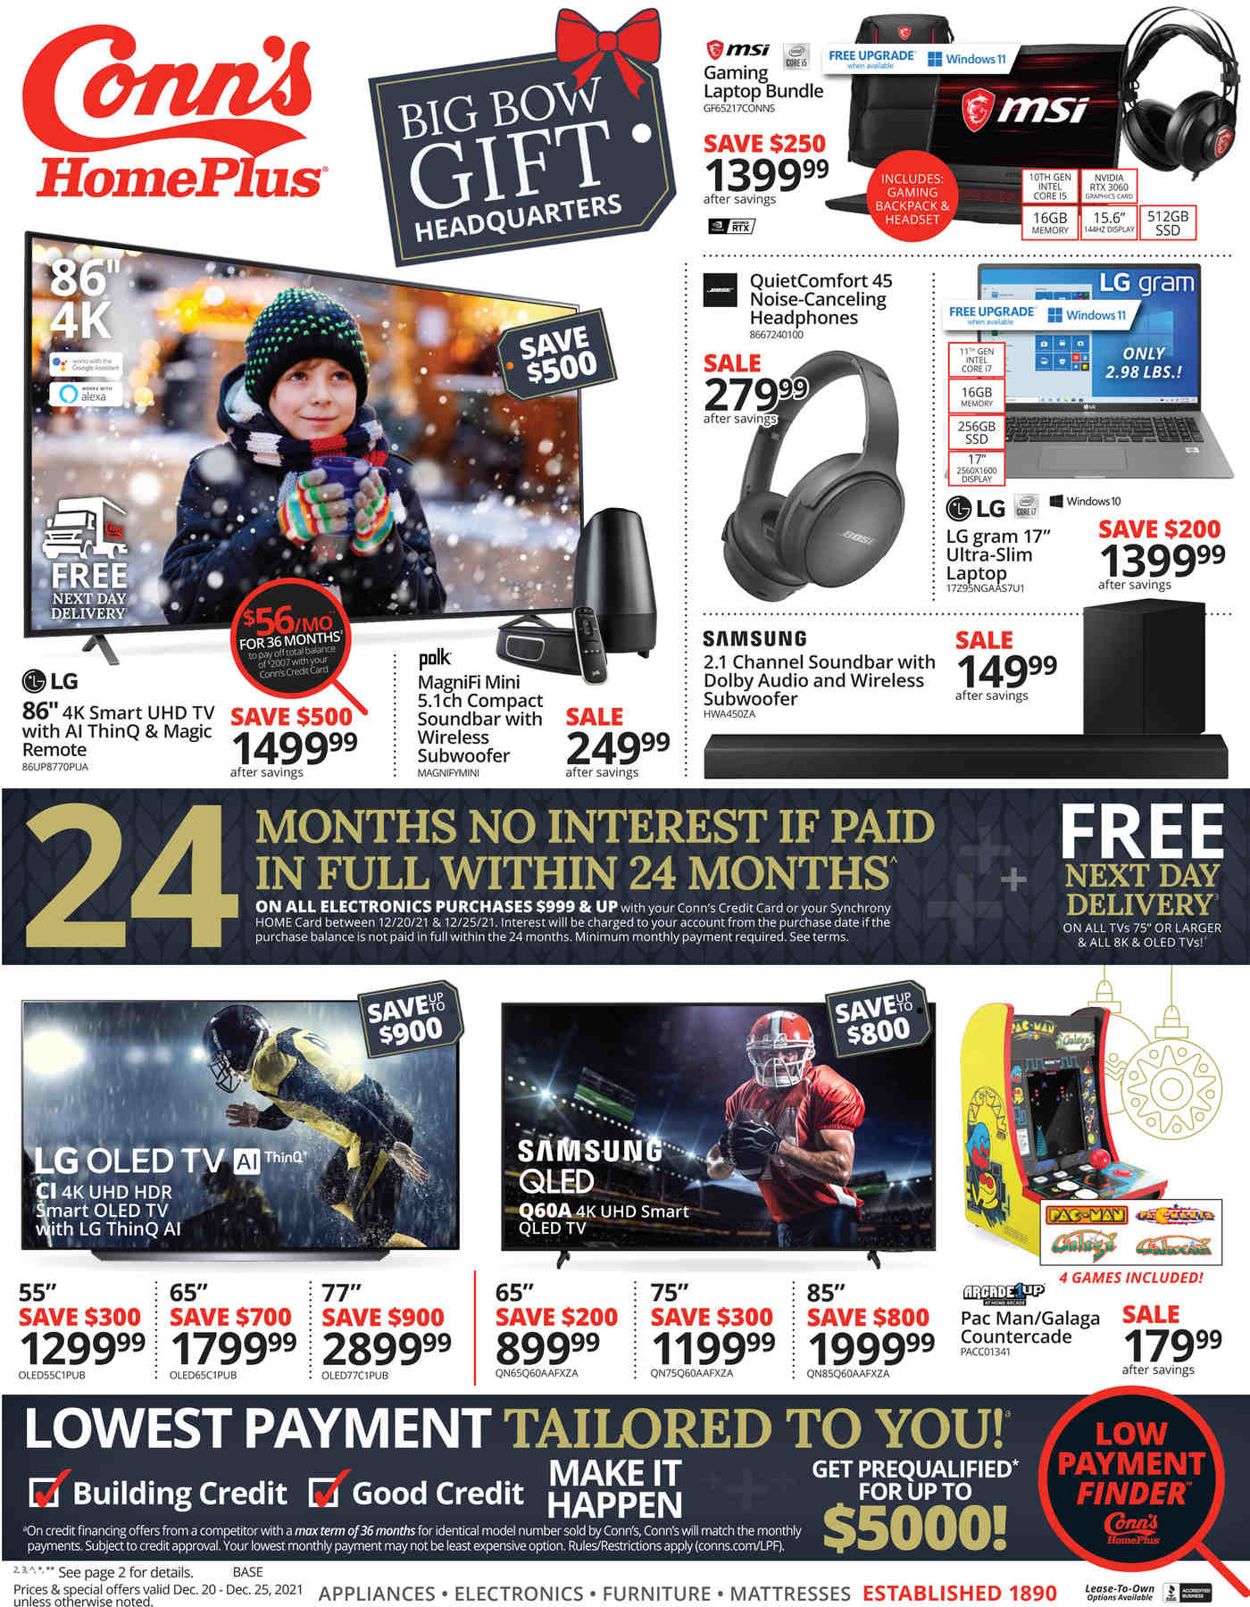 Conn's Home Plus HOLIDAY 2021 Weekly Ad Circular - valid 12/20-12/25/2021